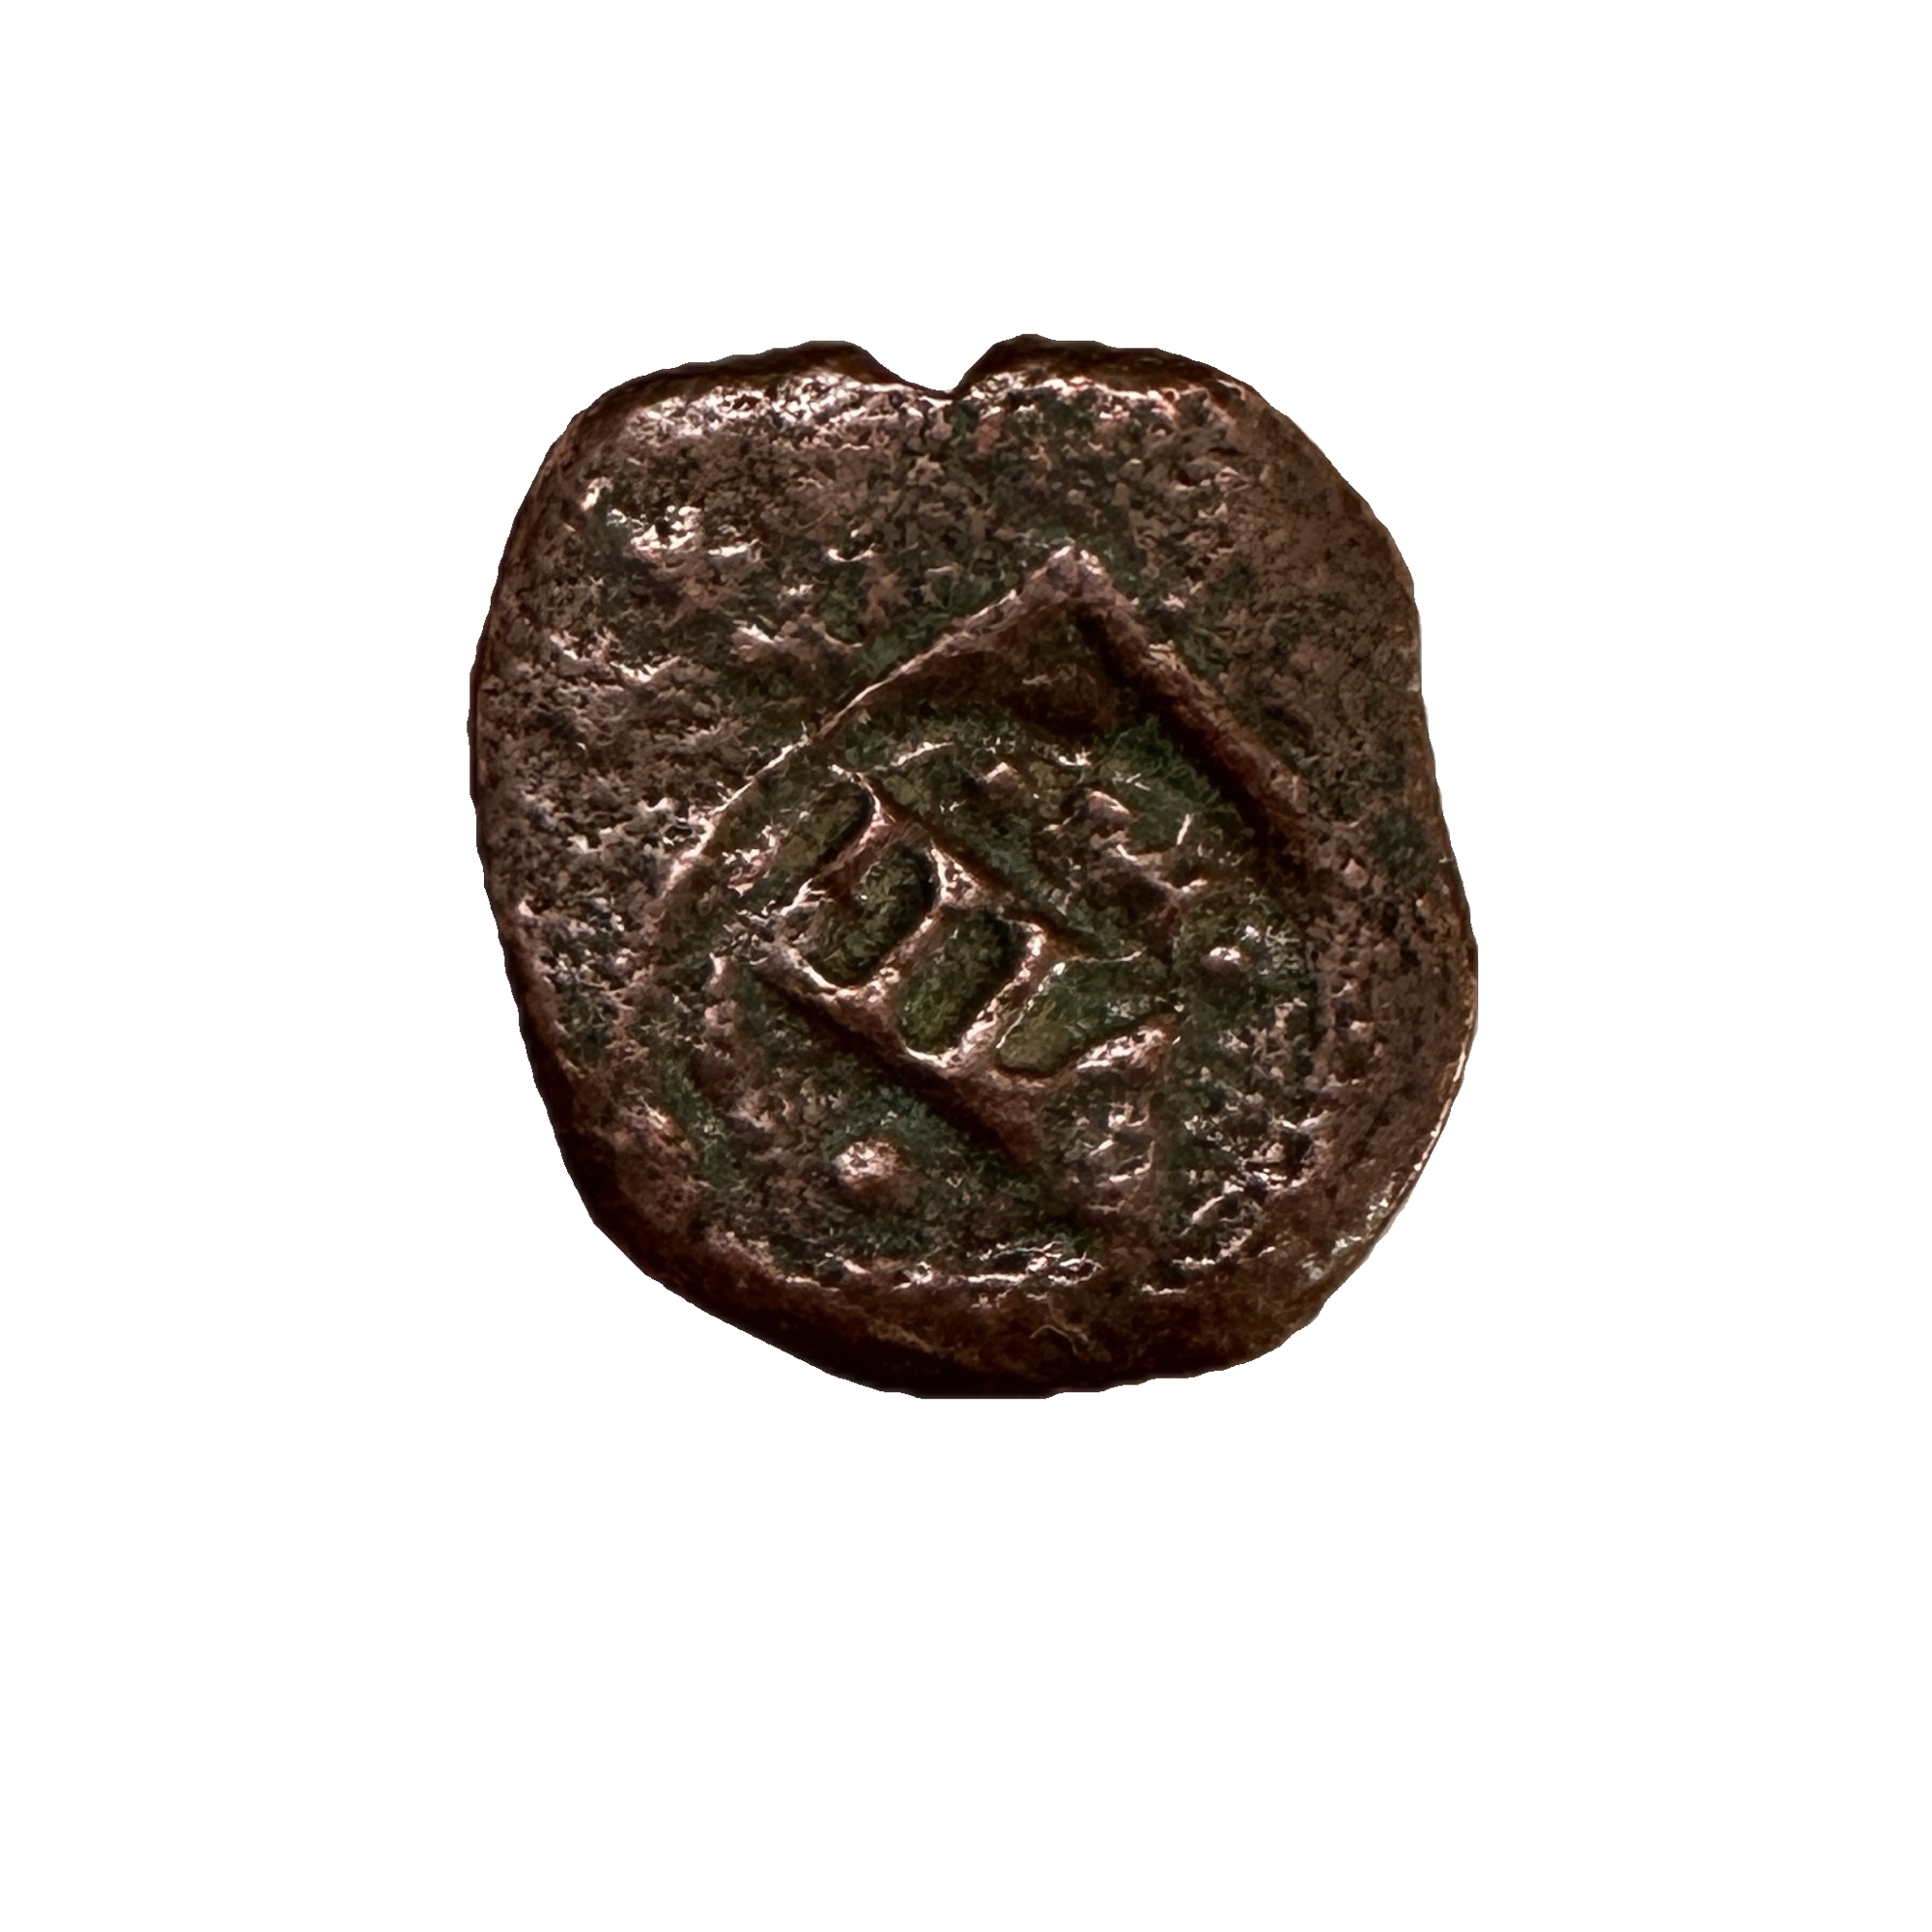 This beautiful Spanish pirate coin exhibits a very defined Roman numeral eight on the front of the coin. This exceptional treasure was found in the 1600s.